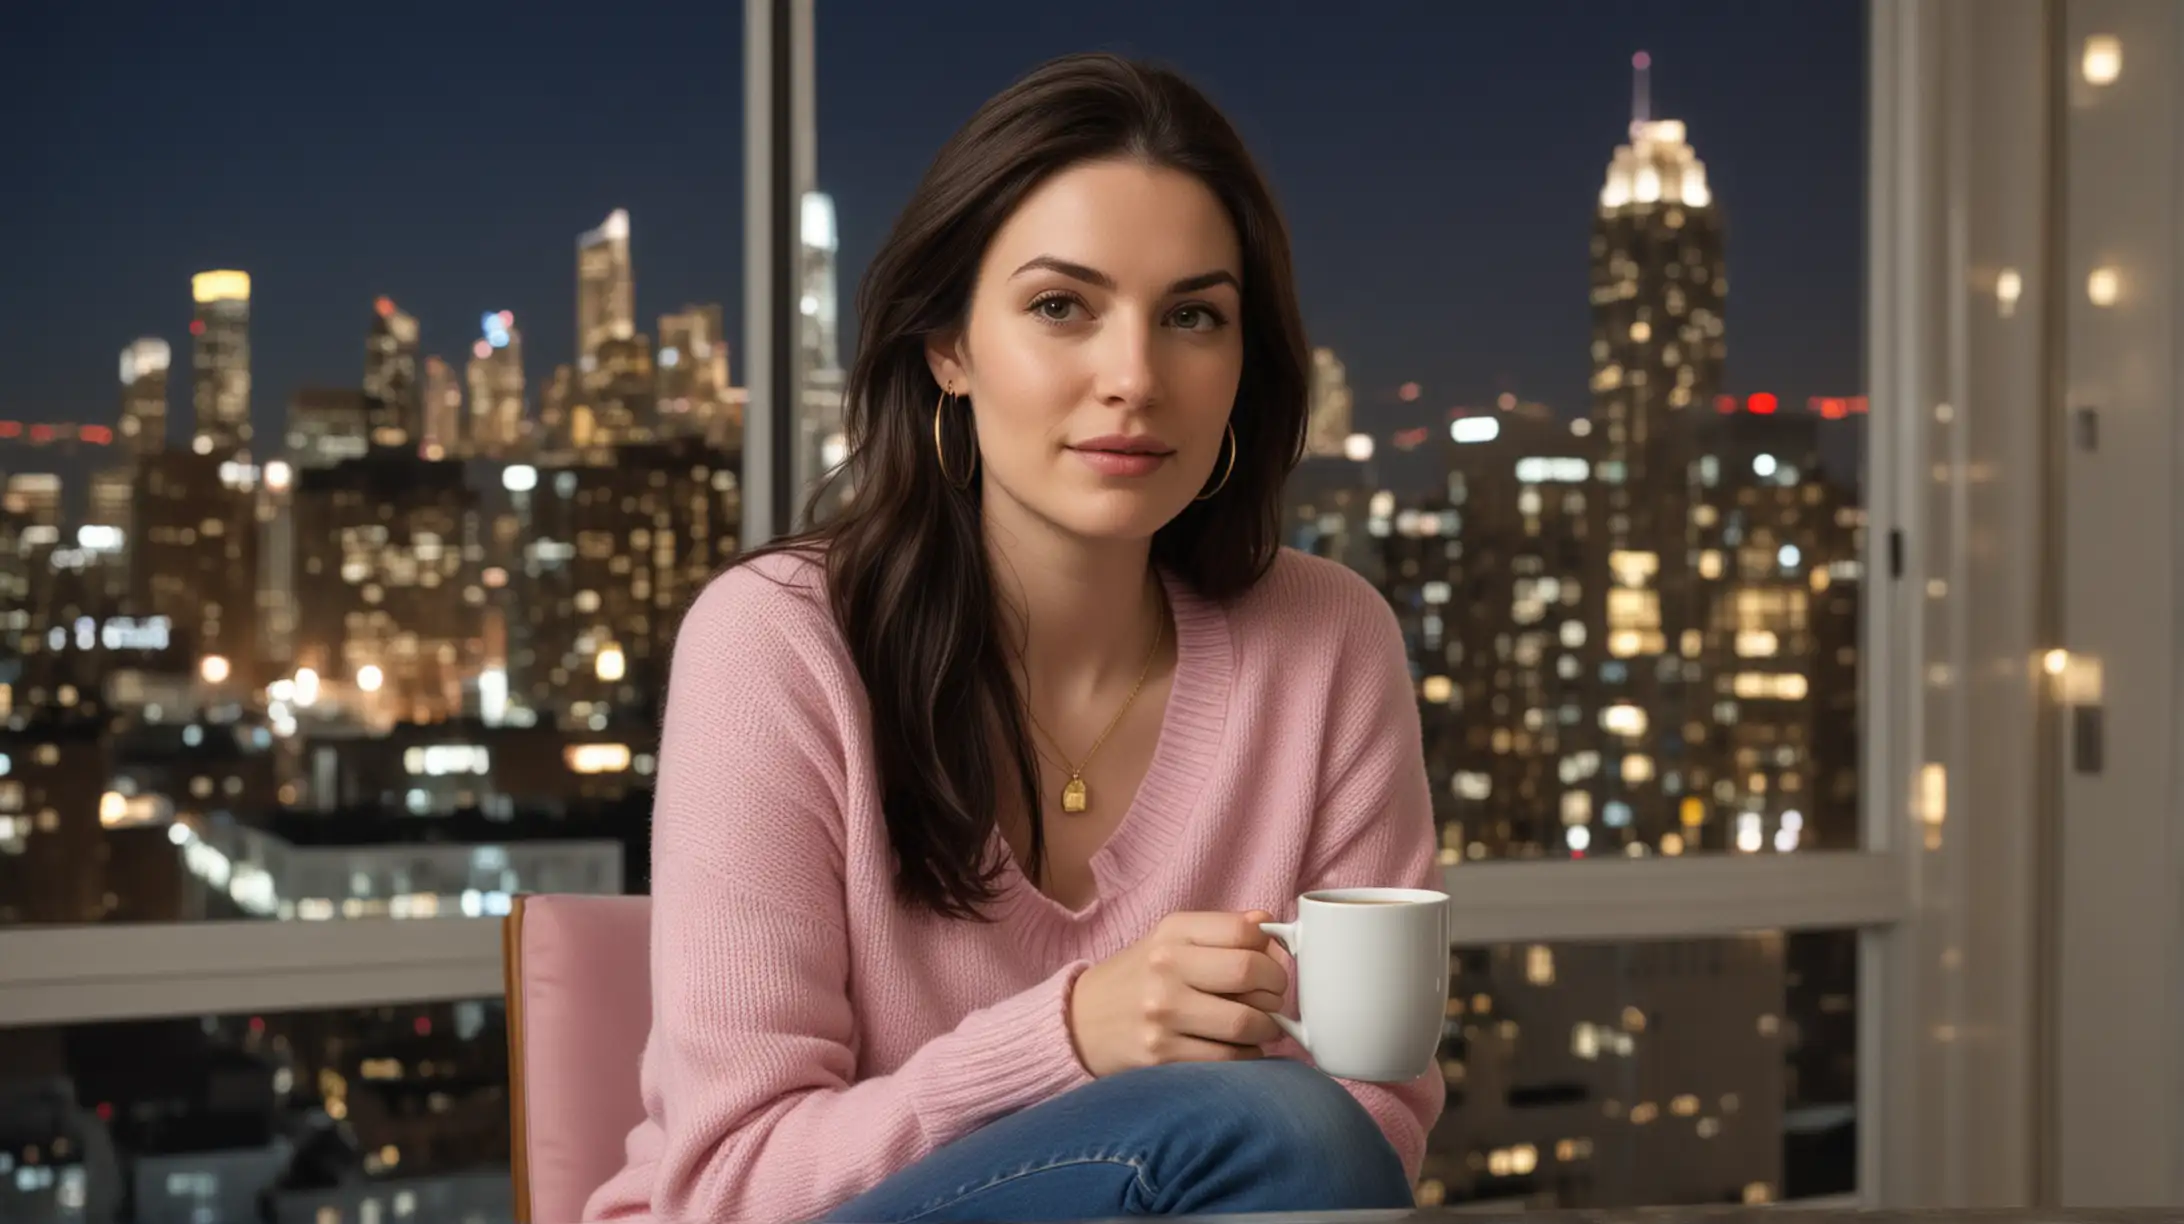 30 year old pale white woman with long dark brown hair parted to the right, wearing a gold necklace, pink sweater and blue jeans, sitting in a chair at a kitchen table with a mug of hot tea, overlooking an urban high rise apartment background at nighttime.